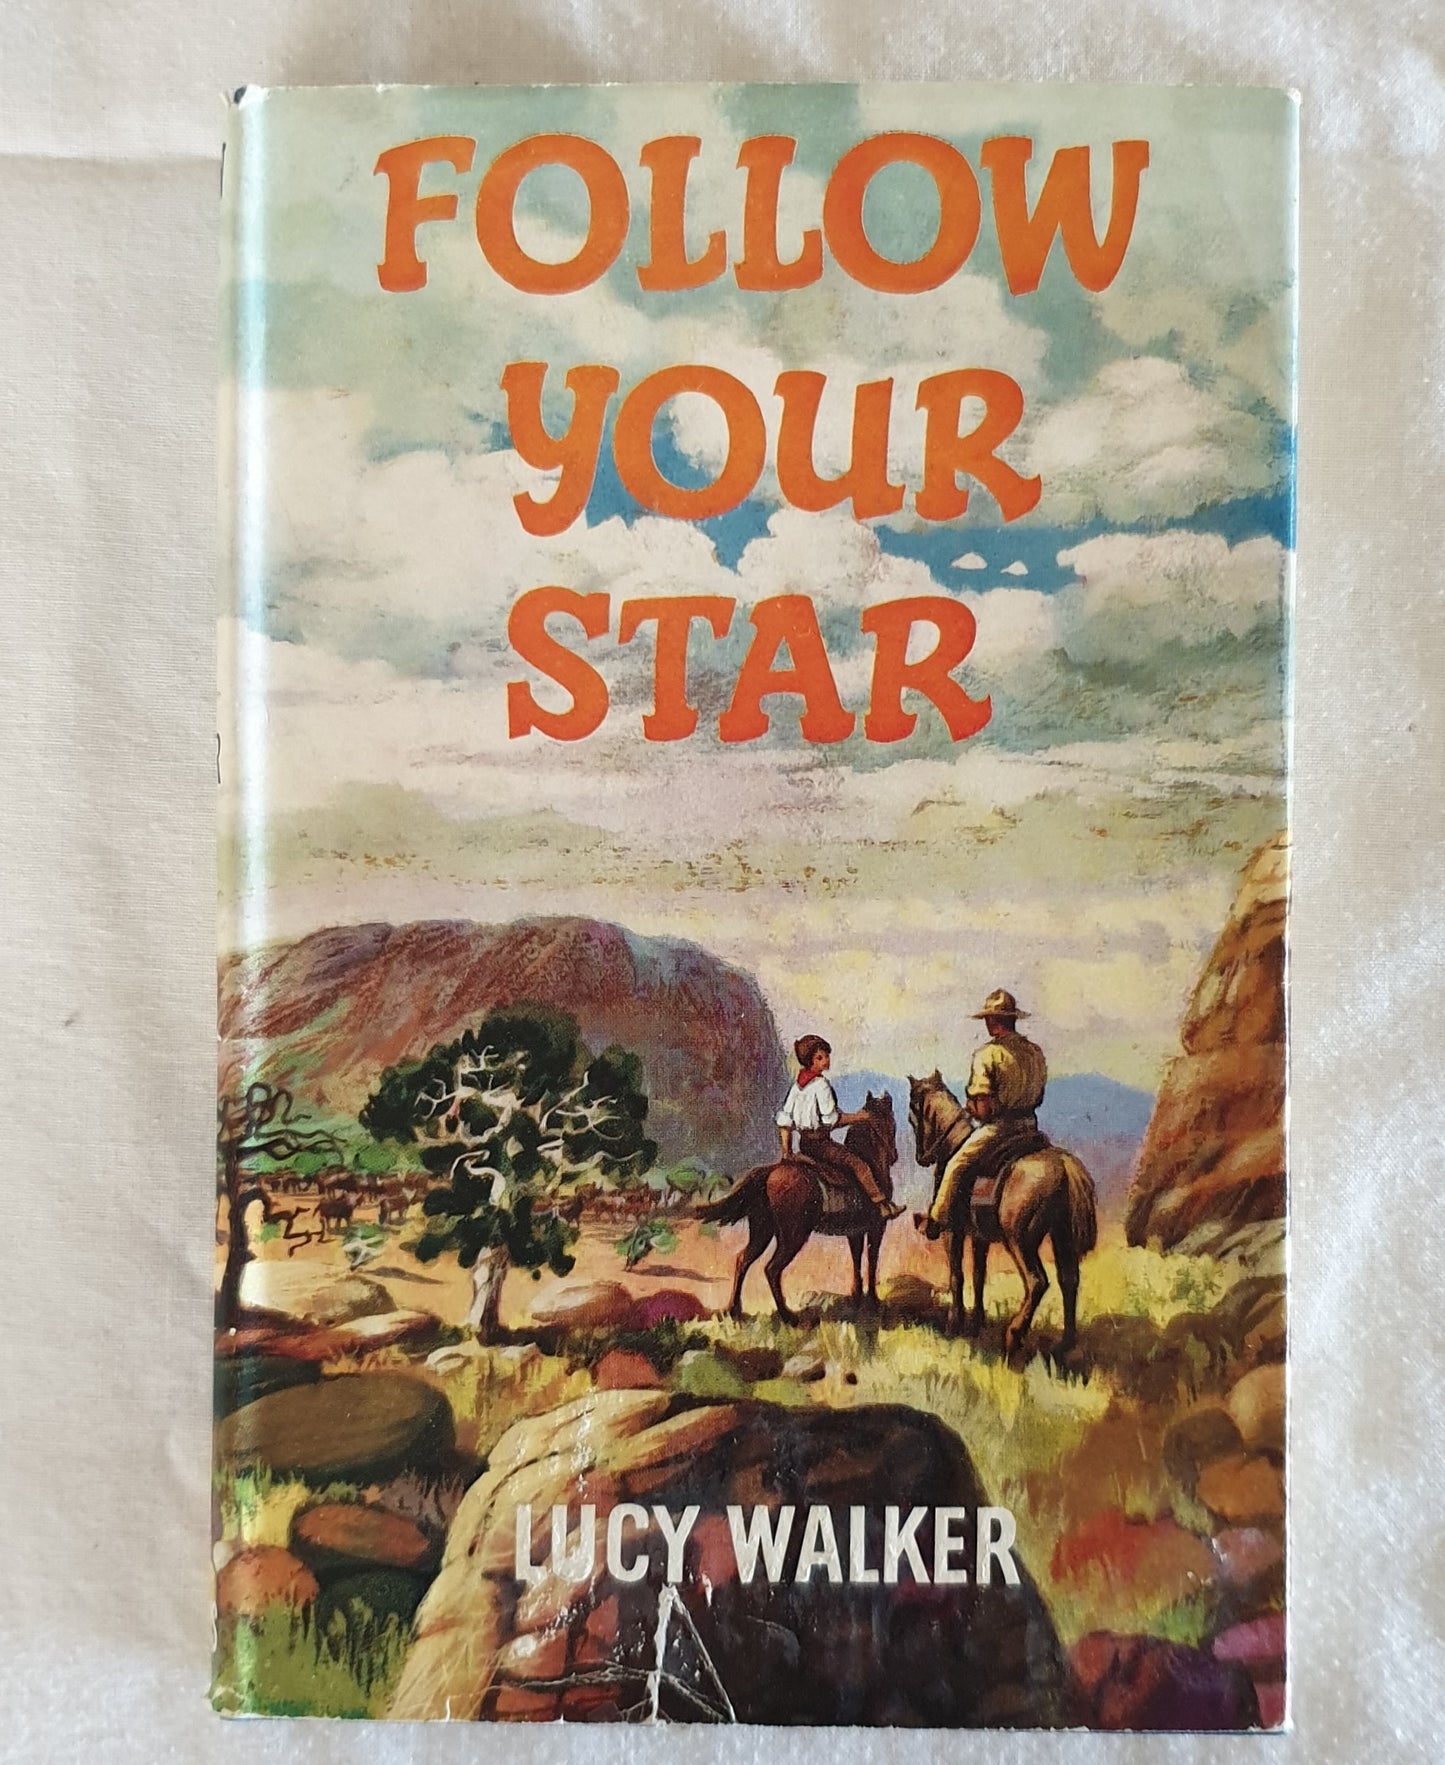 Follow Your Star by Lucy Walker